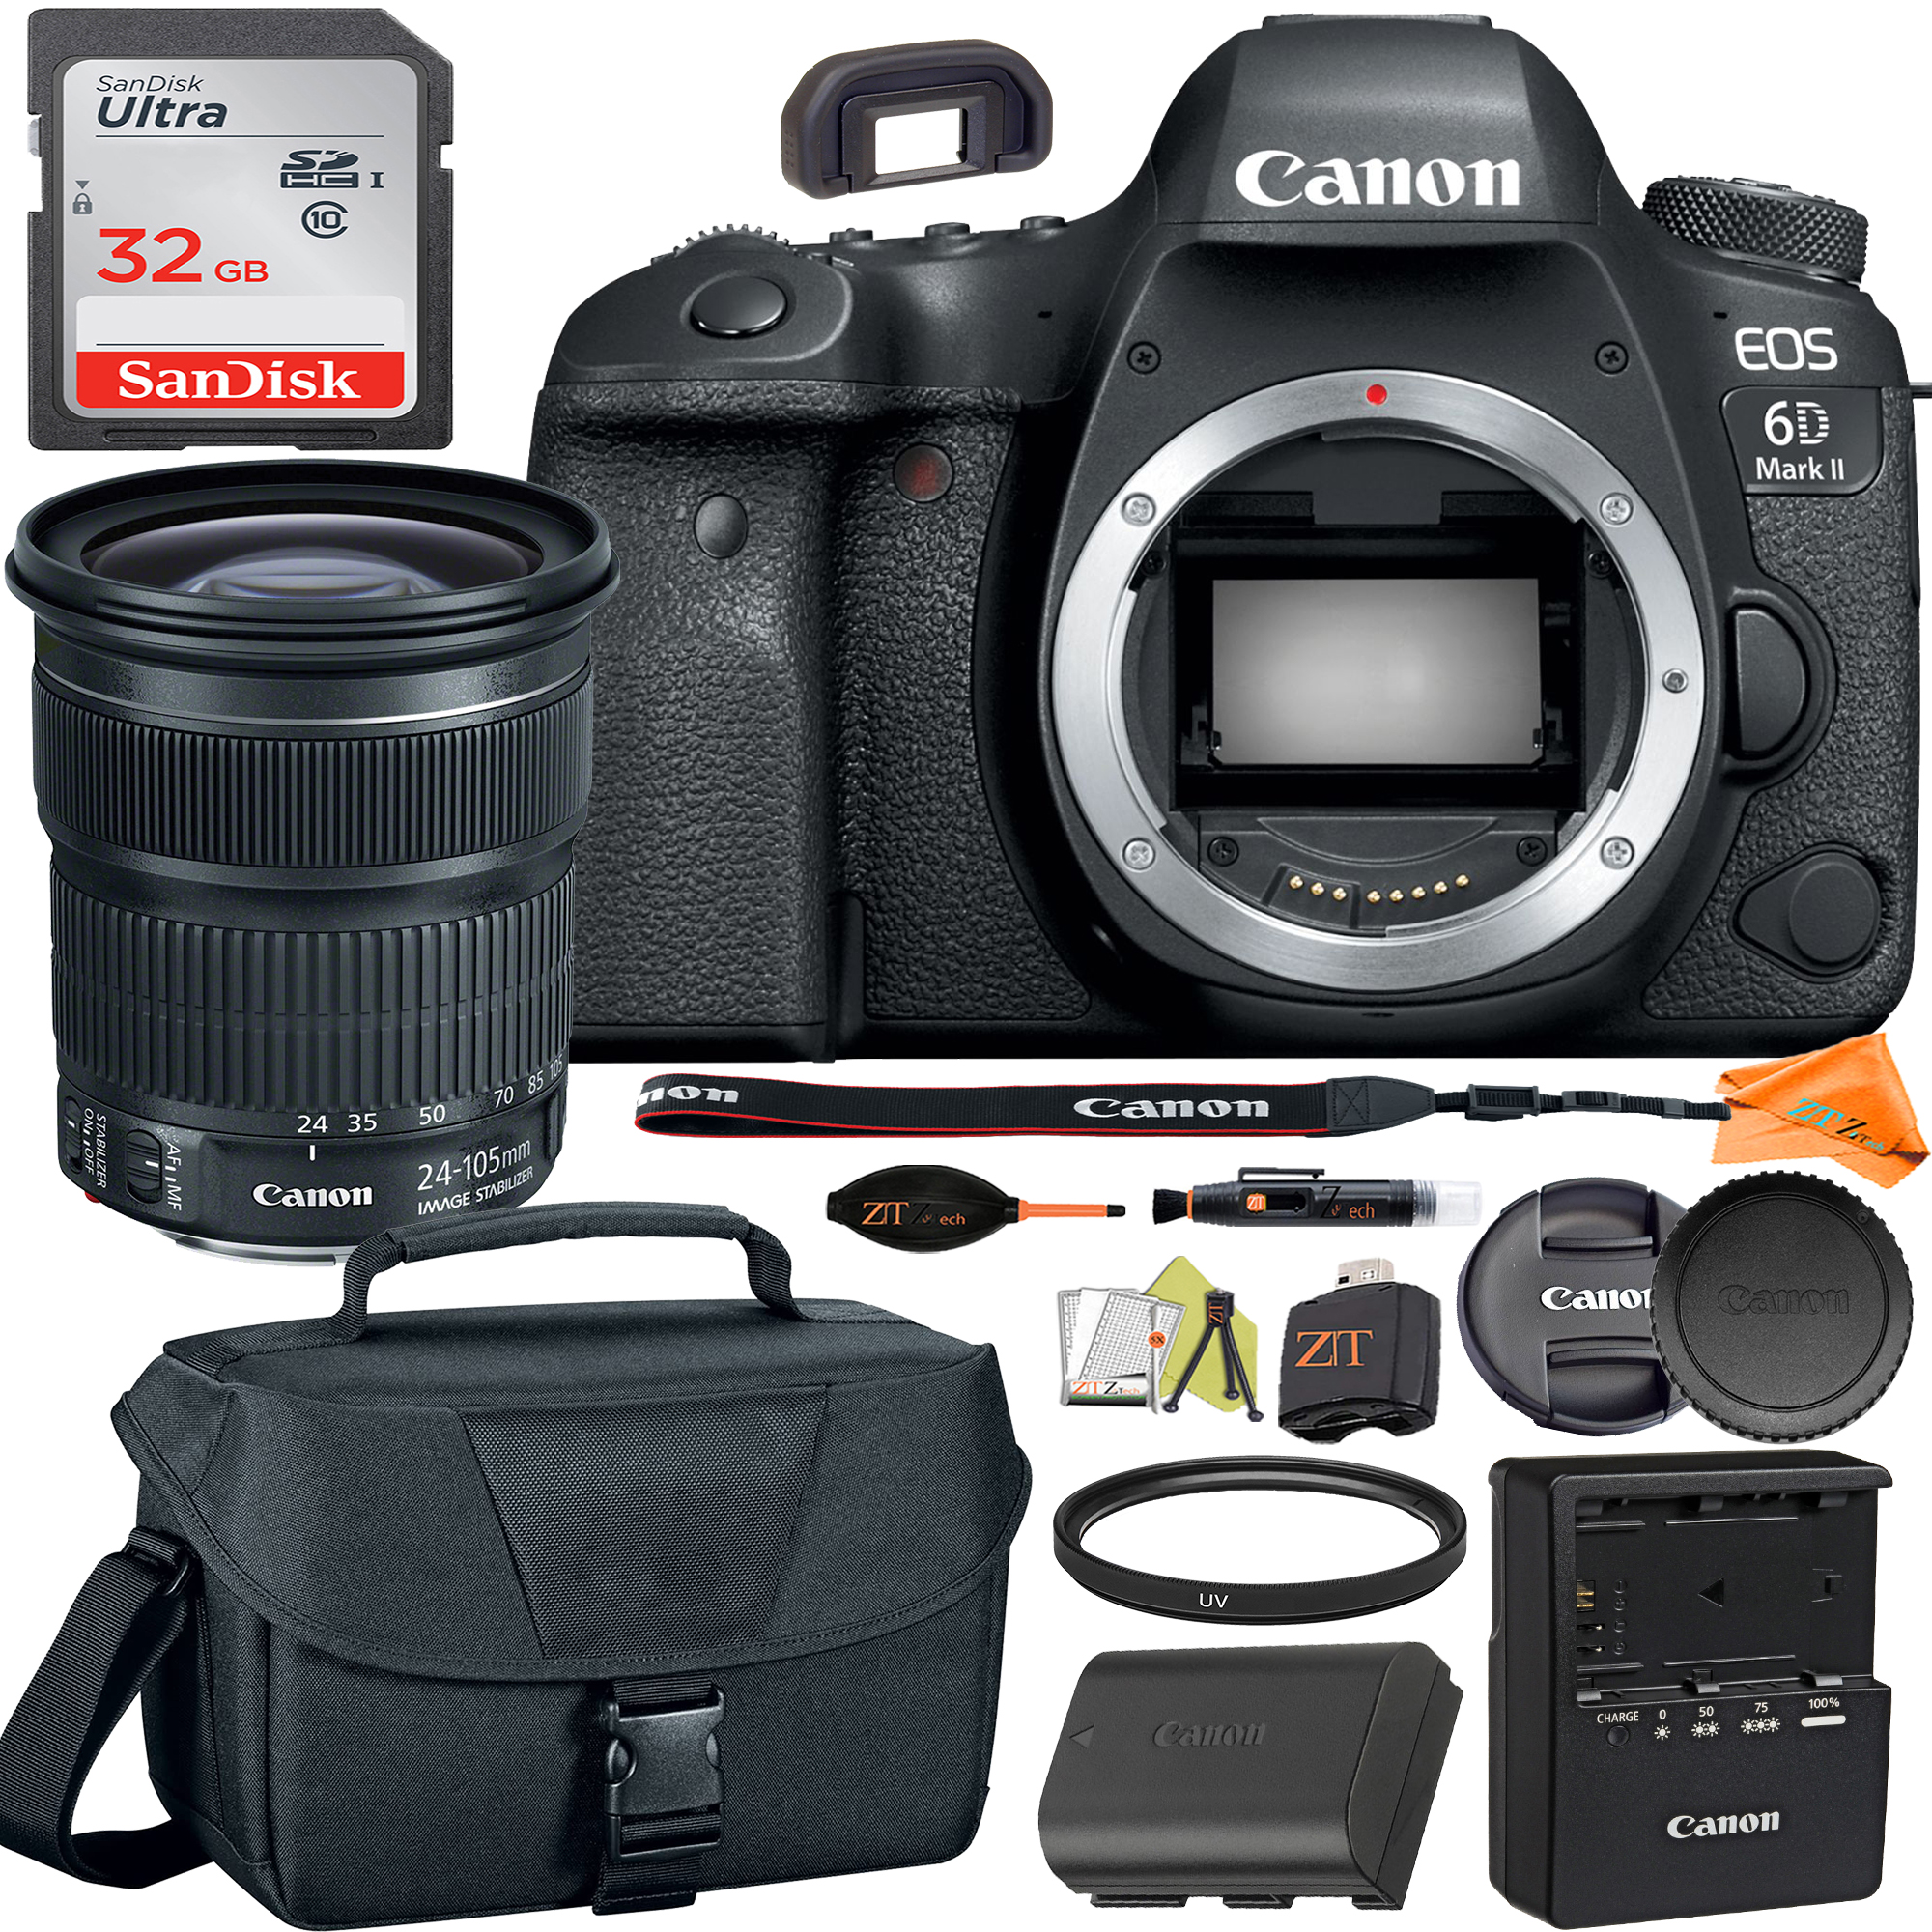 Canon EOS 6D Mark II DSLR Camera with 24-105mm Lens with SanDisk 32GB Card + Case + ZeeTech Accessory Bundle